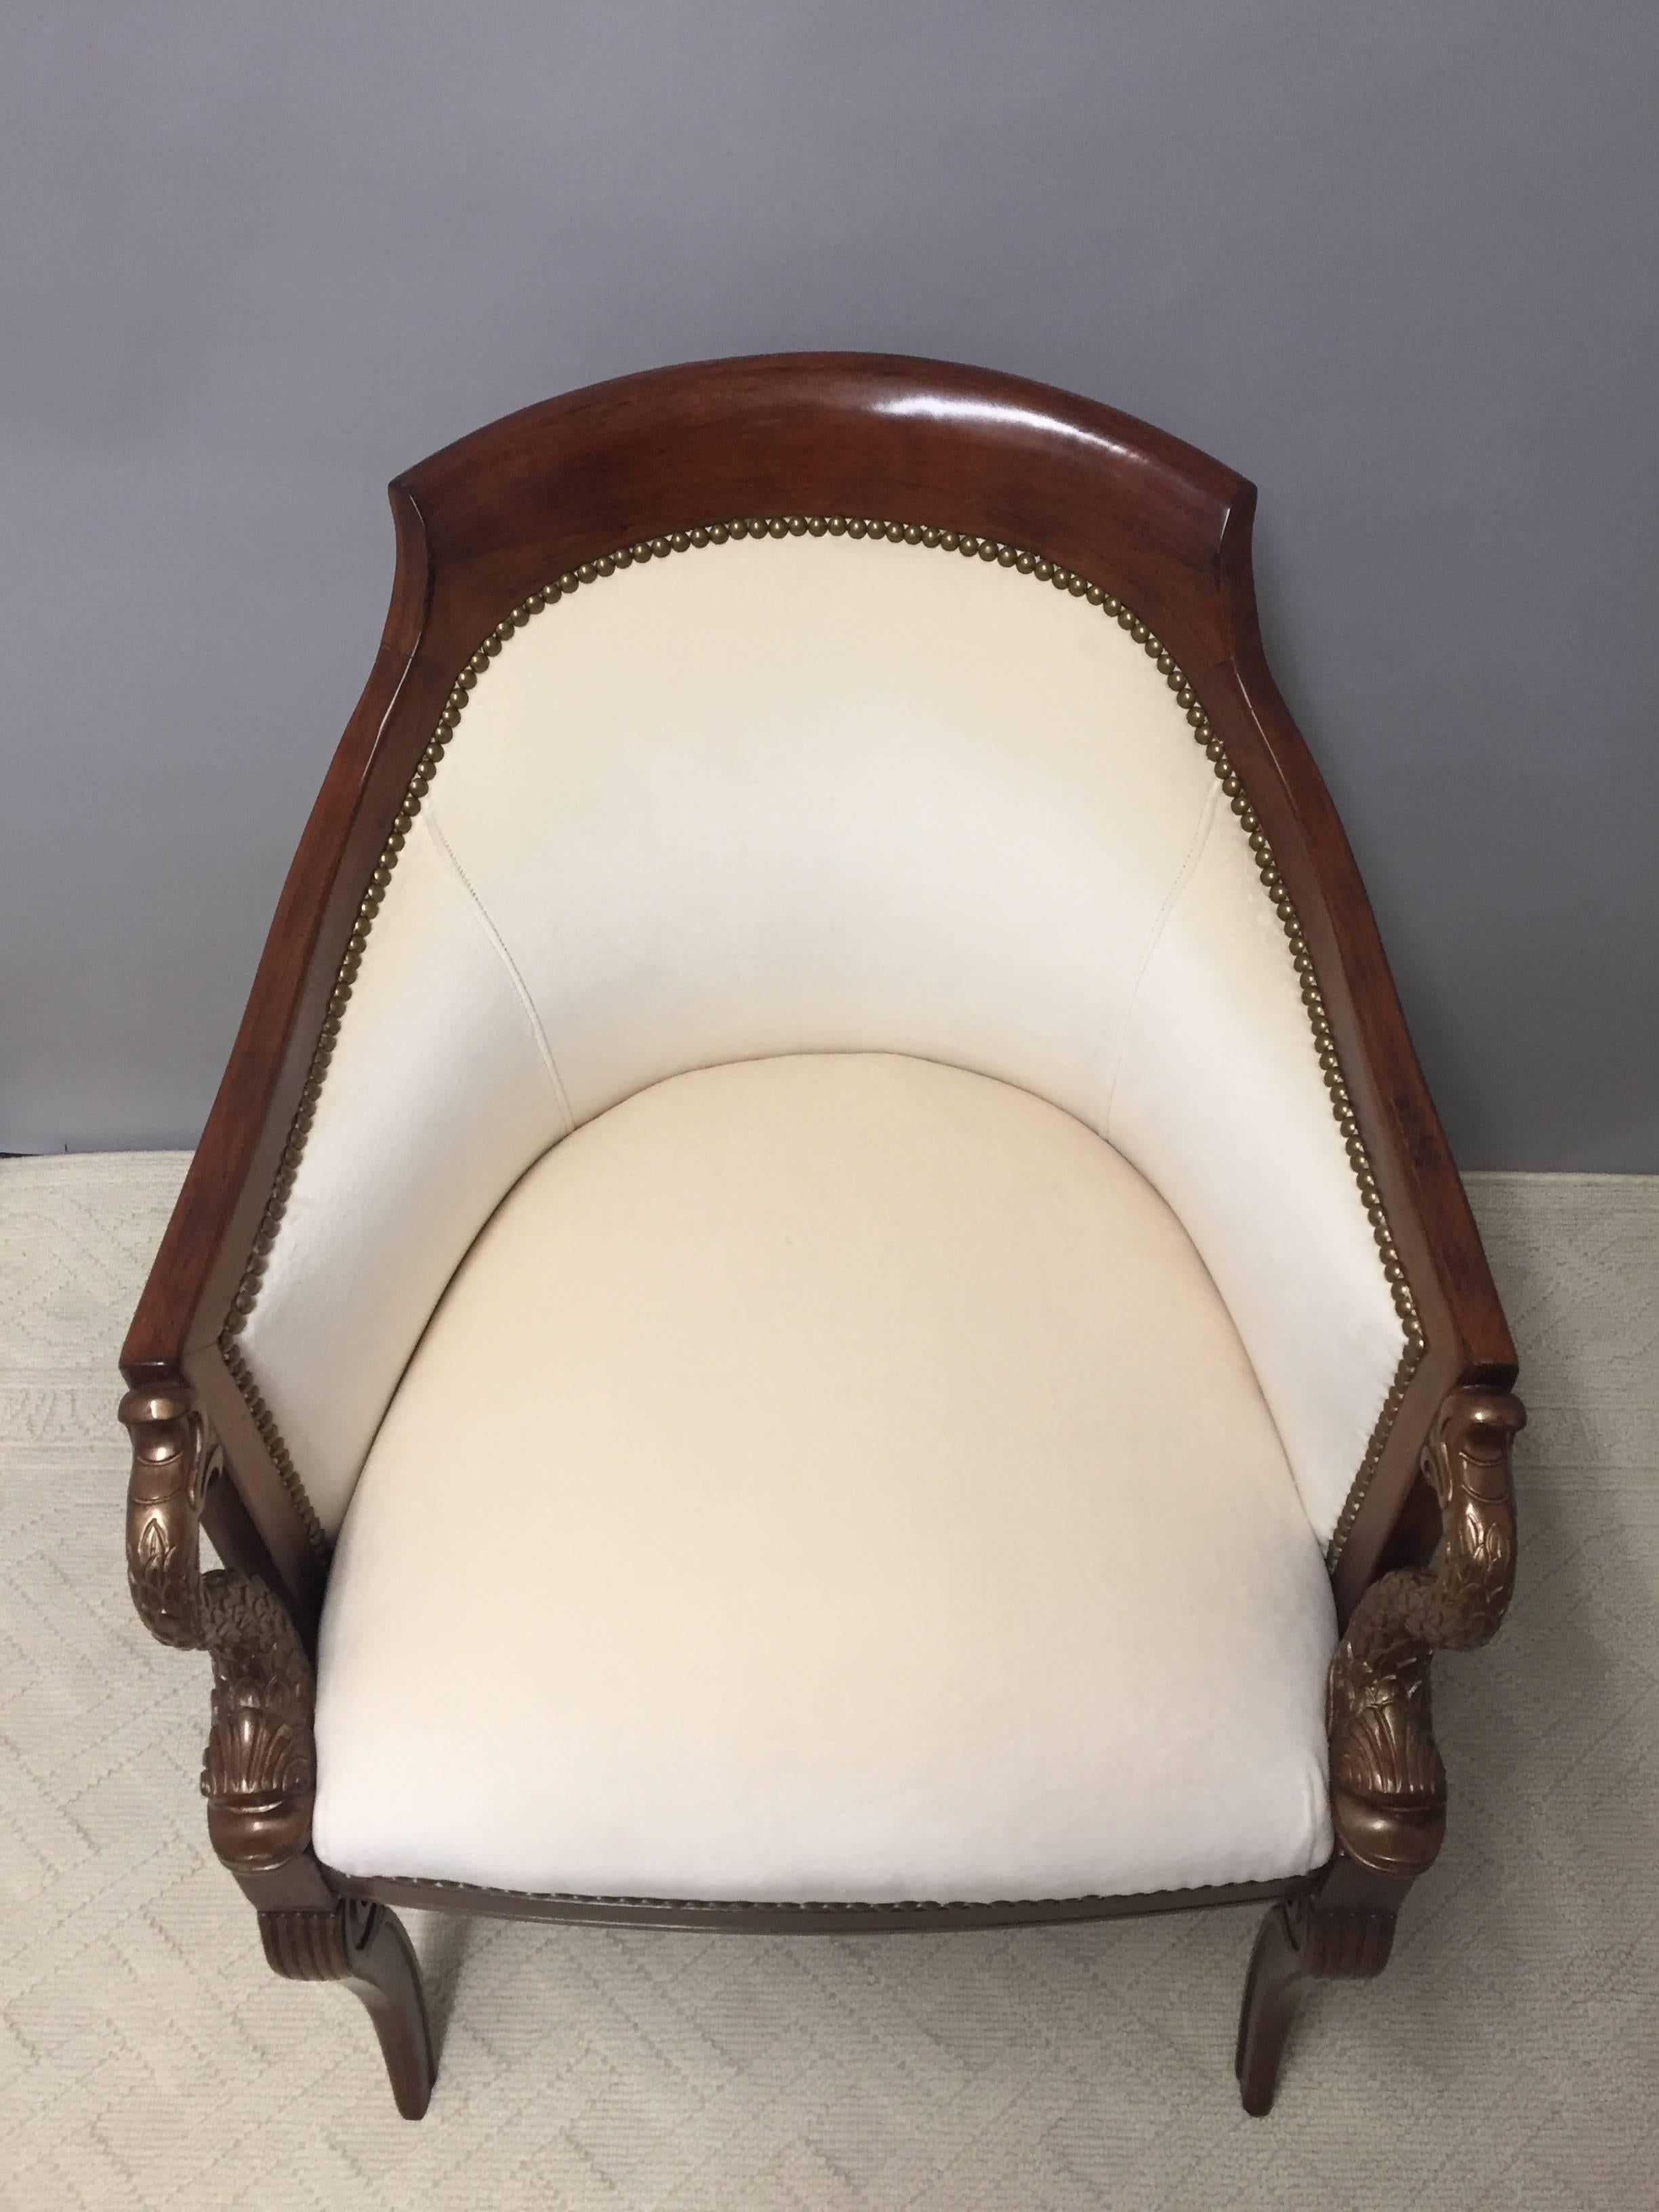 Very elegant pair of club/tub style chairs having a sensual curved back, gorgeous dark ornately carved mahogany frames with dolphins on the arms that have a subtle bronze metallic under finish and decorative scrolly legs.

RR
 